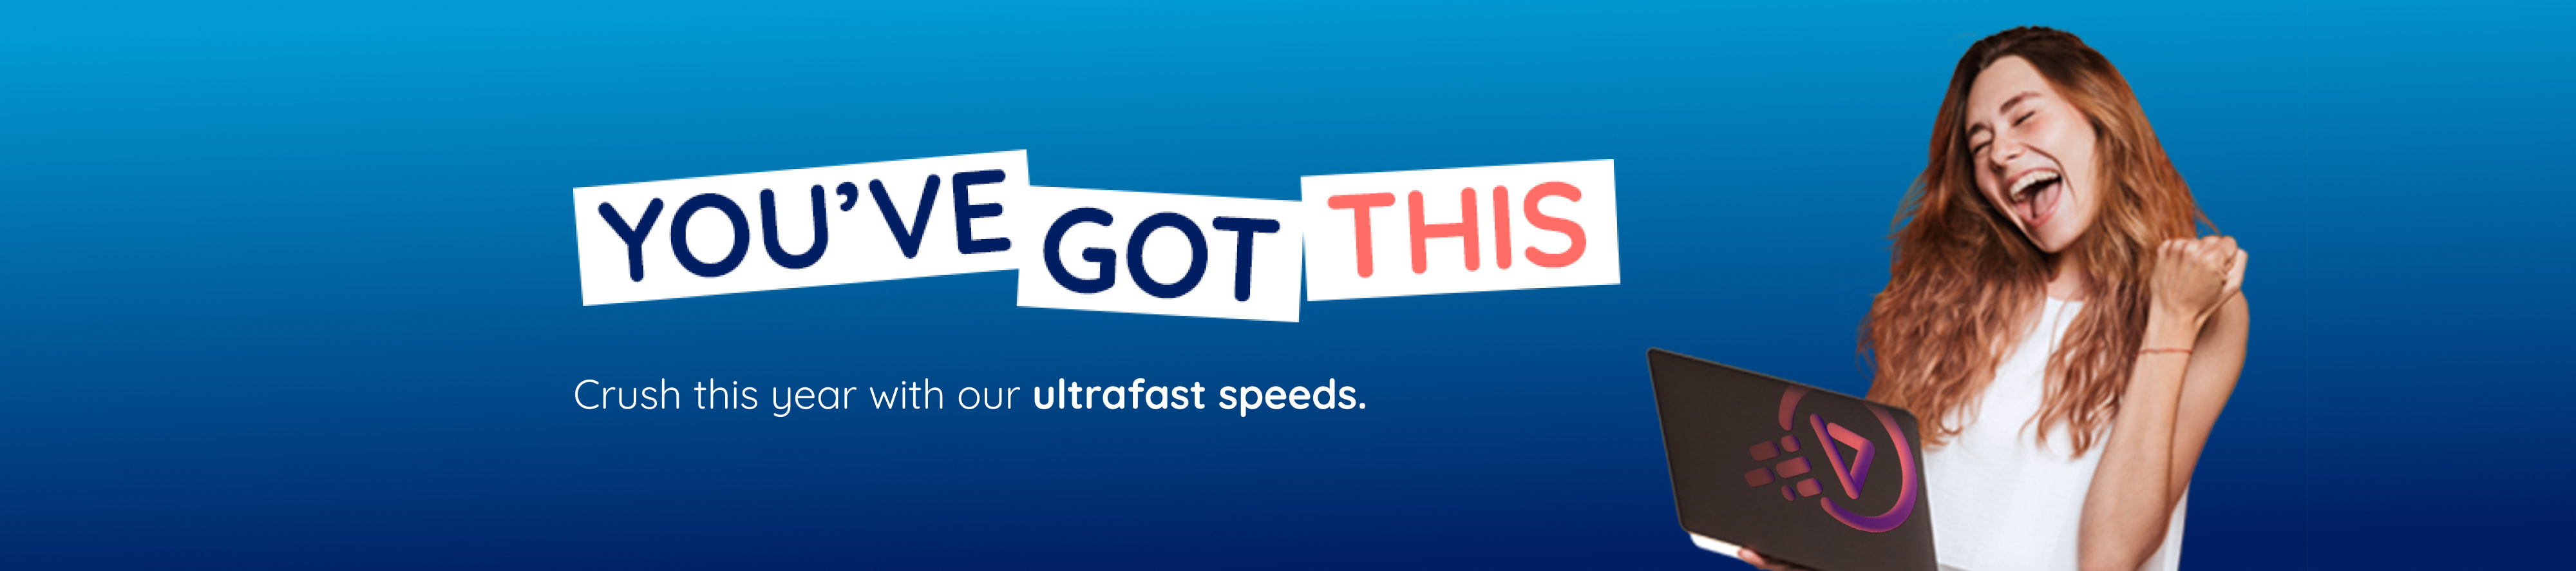 You’ve got this Crush this year with our ultrafast speeds.